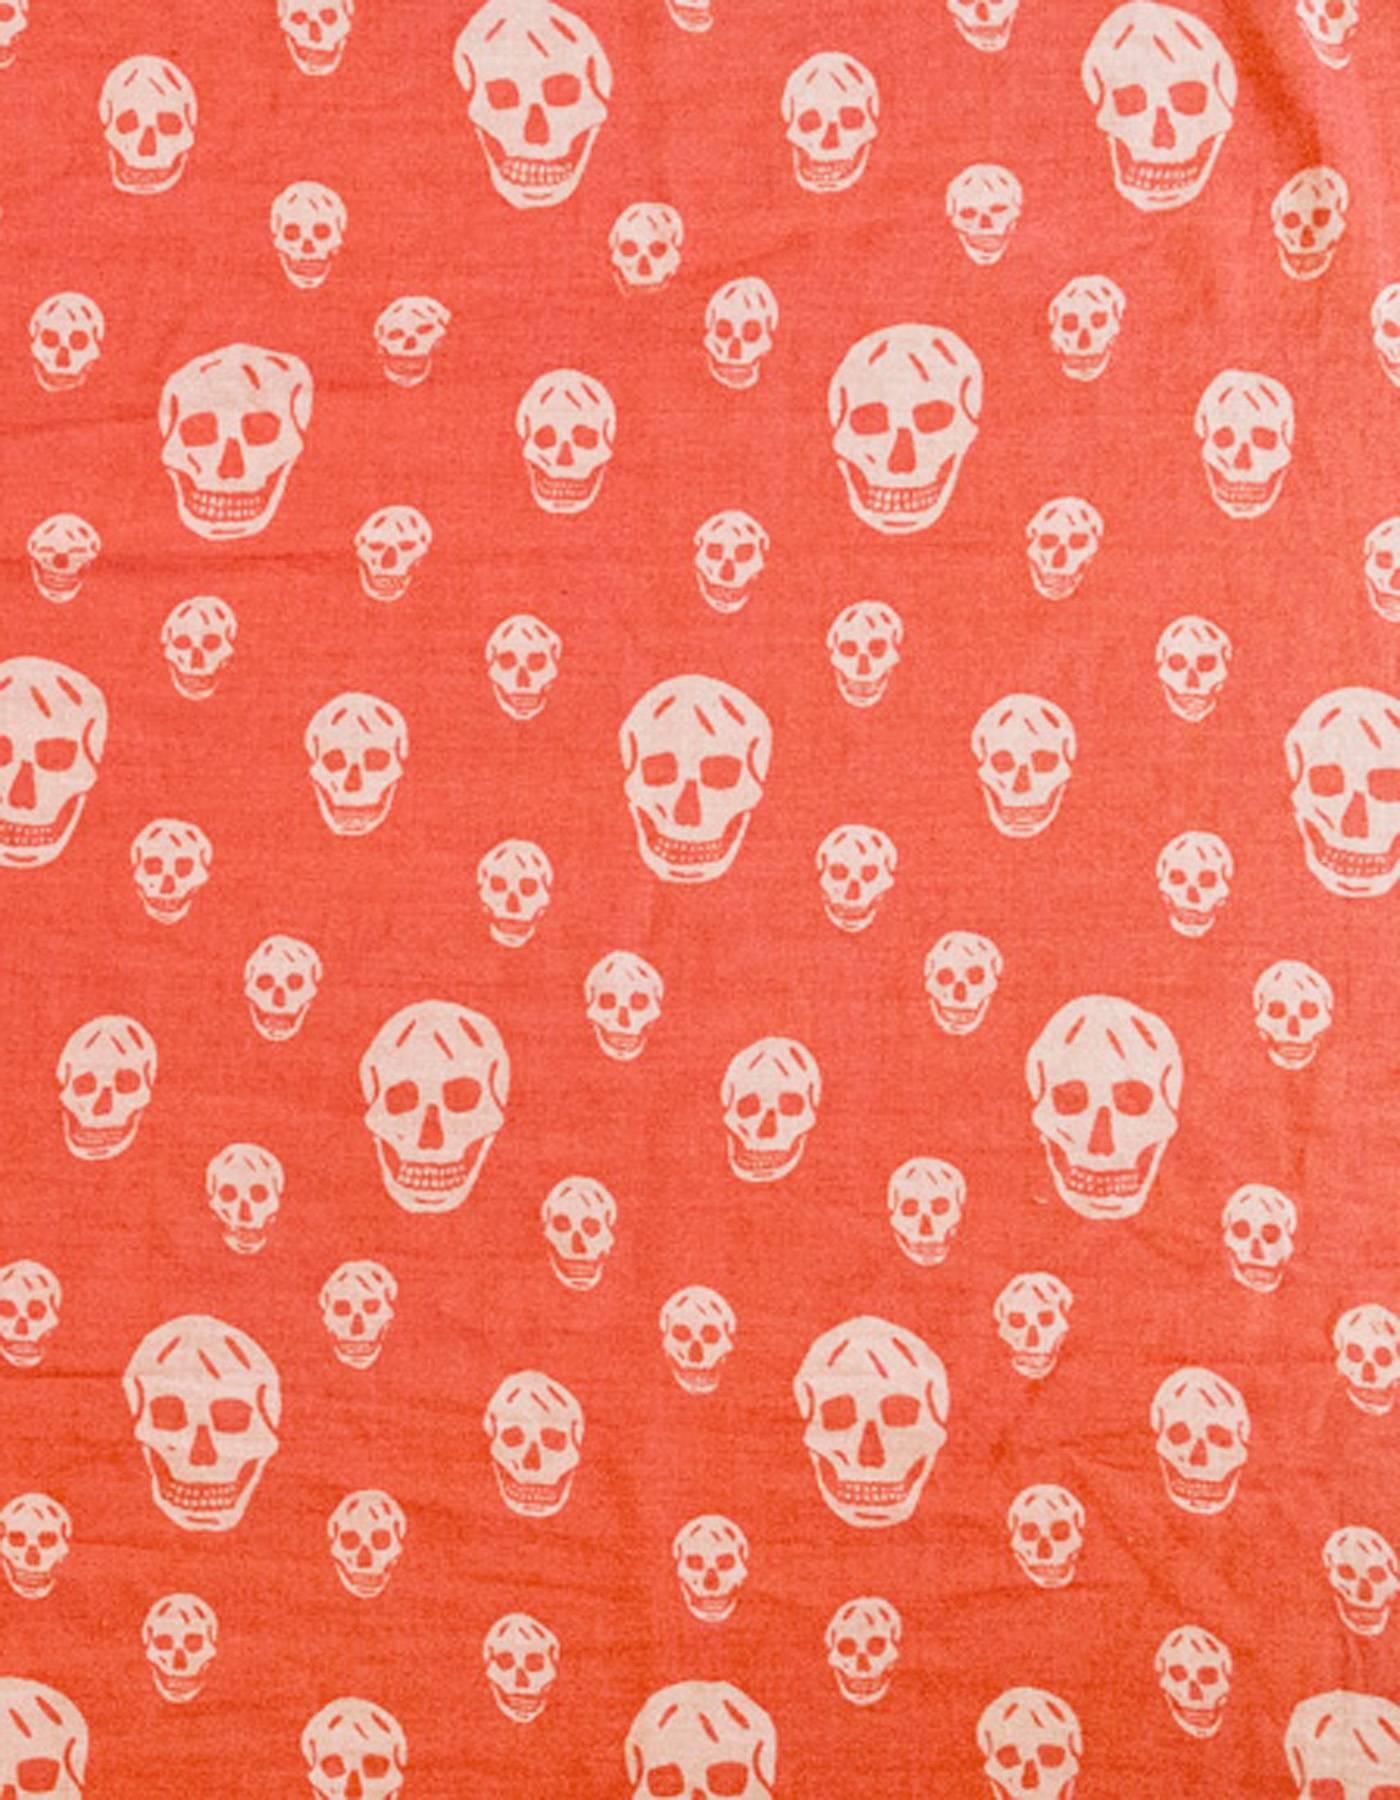 Red Alexander McQueen Cotton Coral and White Classic Skull XL Scarf